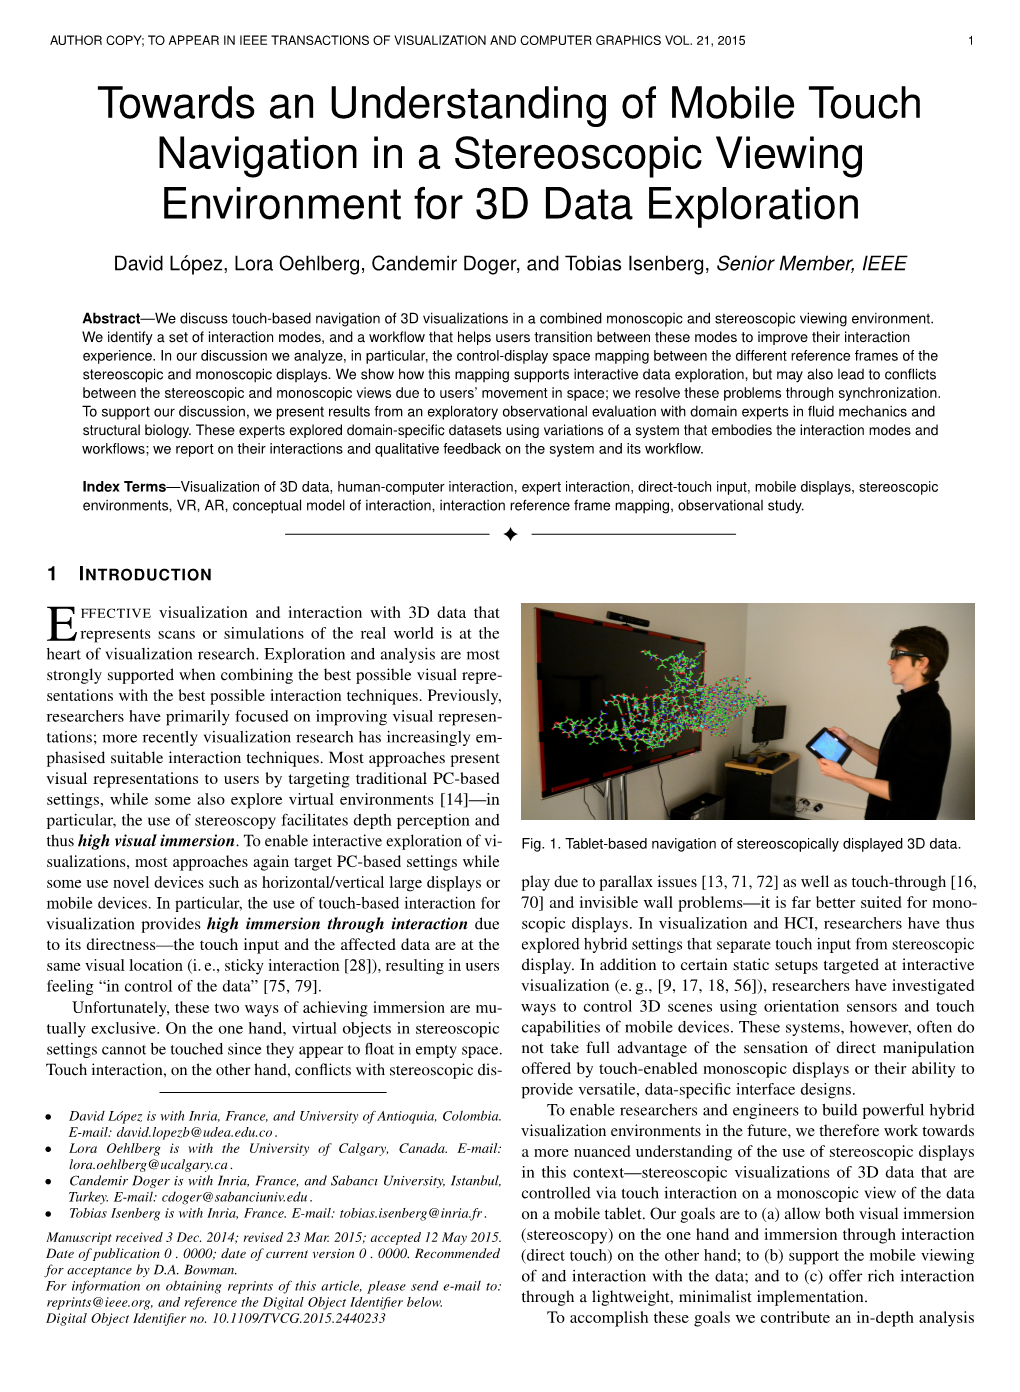 Towards an Understanding of Mobile Touch Navigation in a Stereoscopic Viewing Environment for 3D Data Exploration